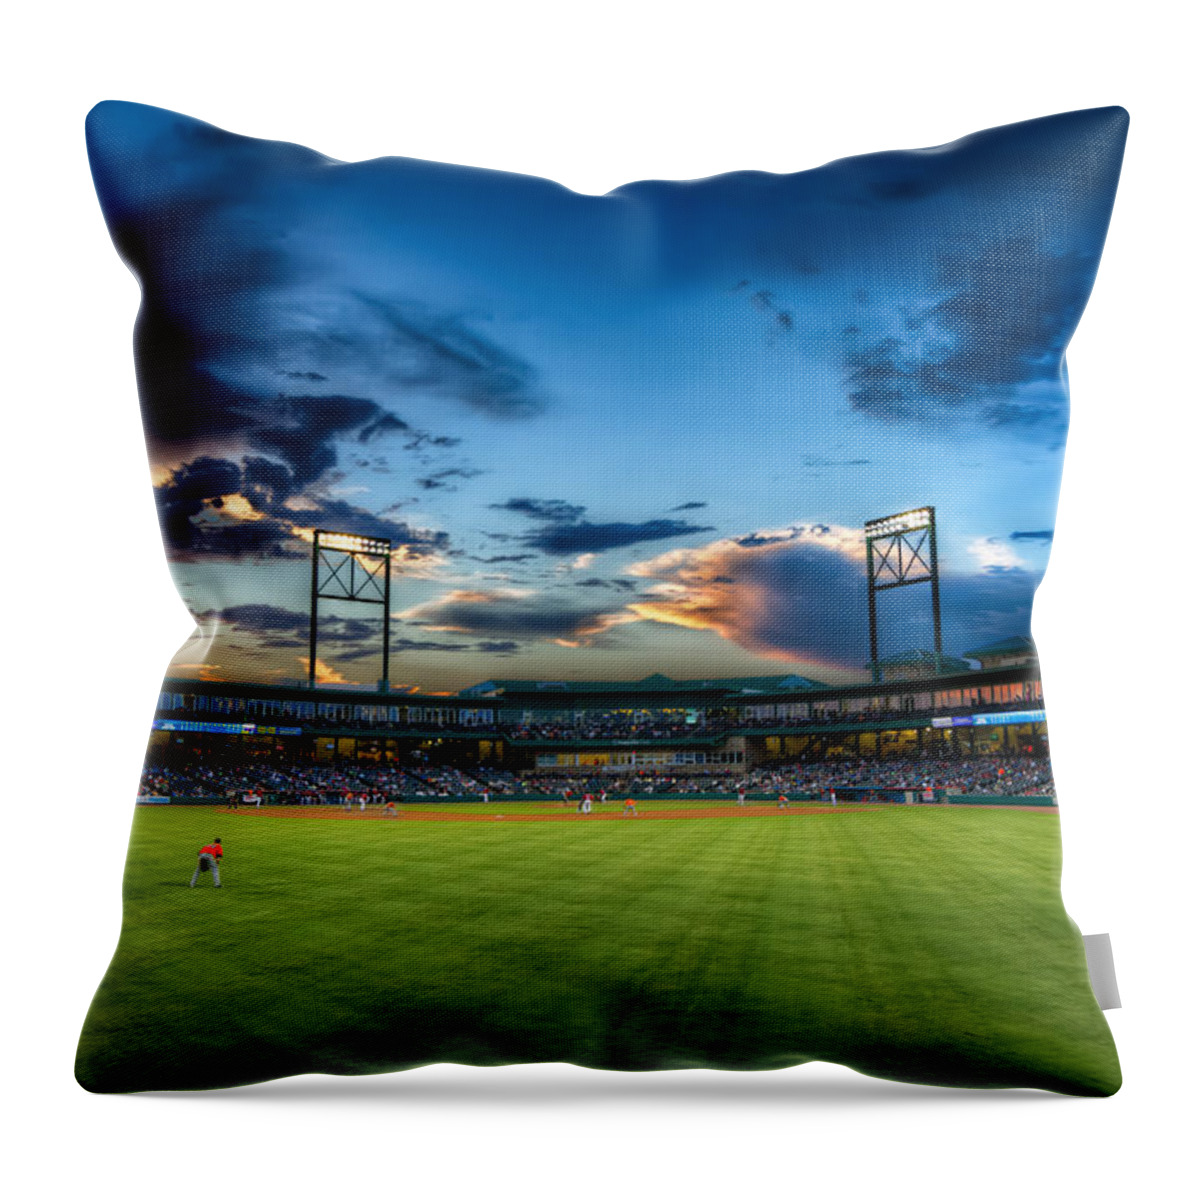 2014 Throw Pillow featuring the photograph A Constellation Sunset 2014 by Tim Stanley